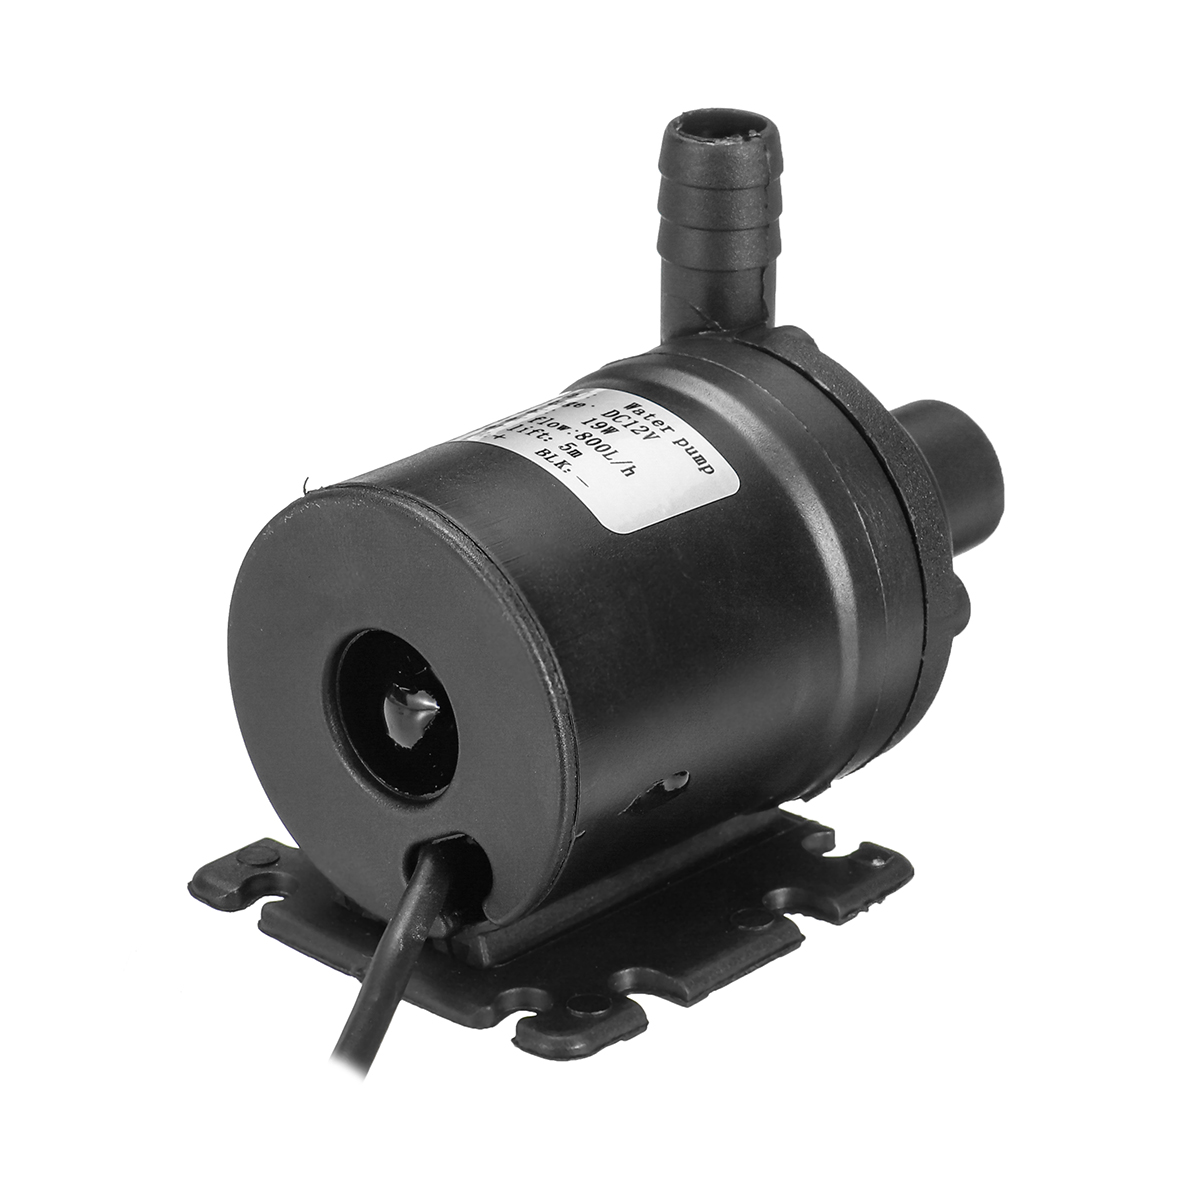 ZYW680-DC-12V-Water-Pump-Ultra-Quiet-Mini-55m-Lift-Brushless-Motor-Submersible-Water-Pump-1531599-8